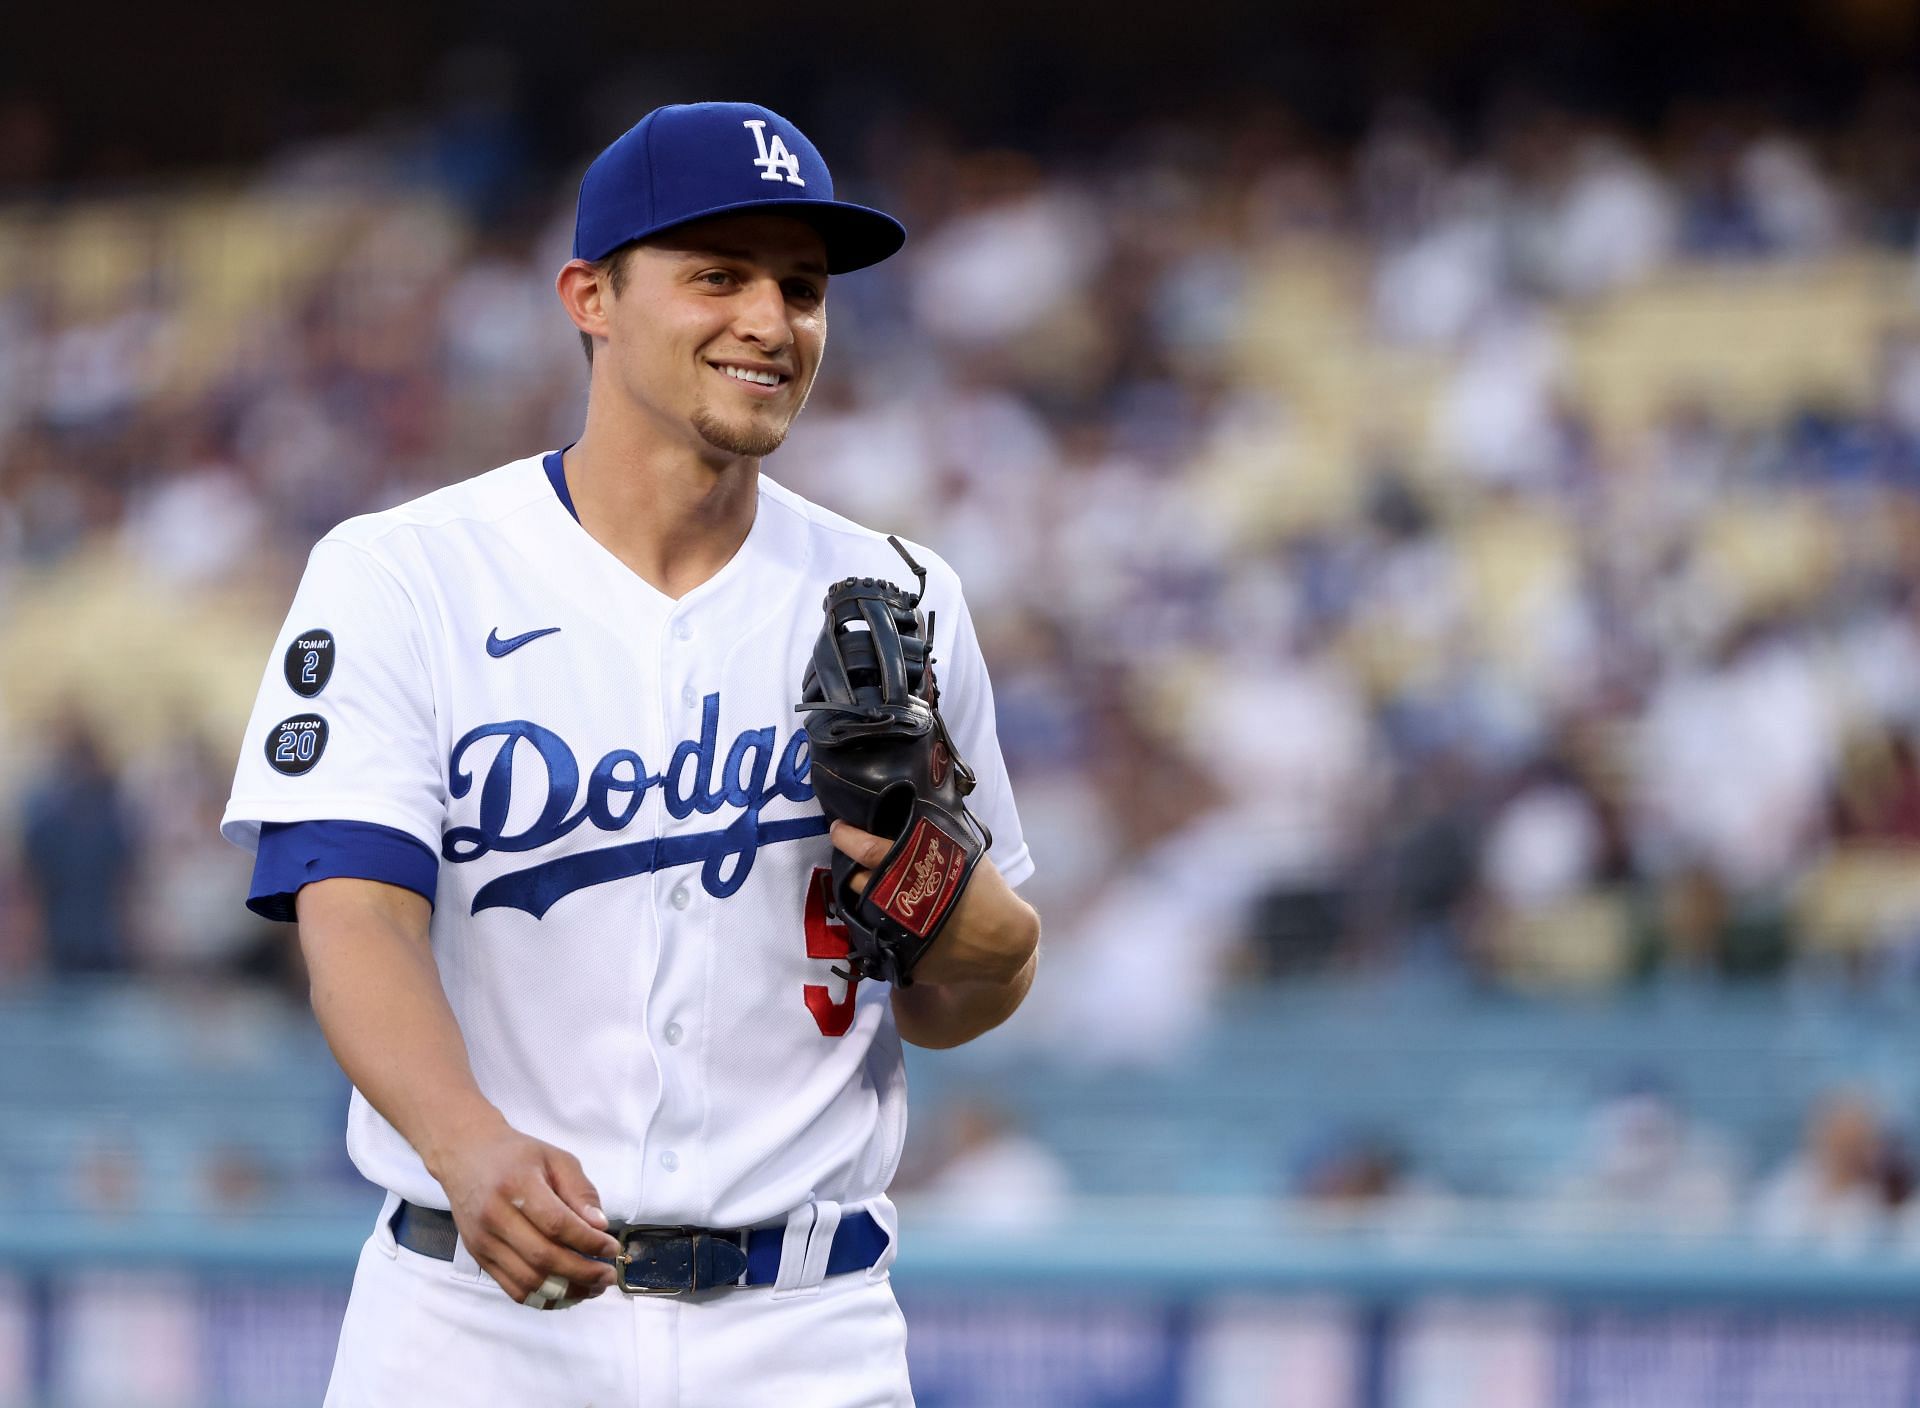 Corey Seager is World Series MVP. Dodger shortstop dominated the